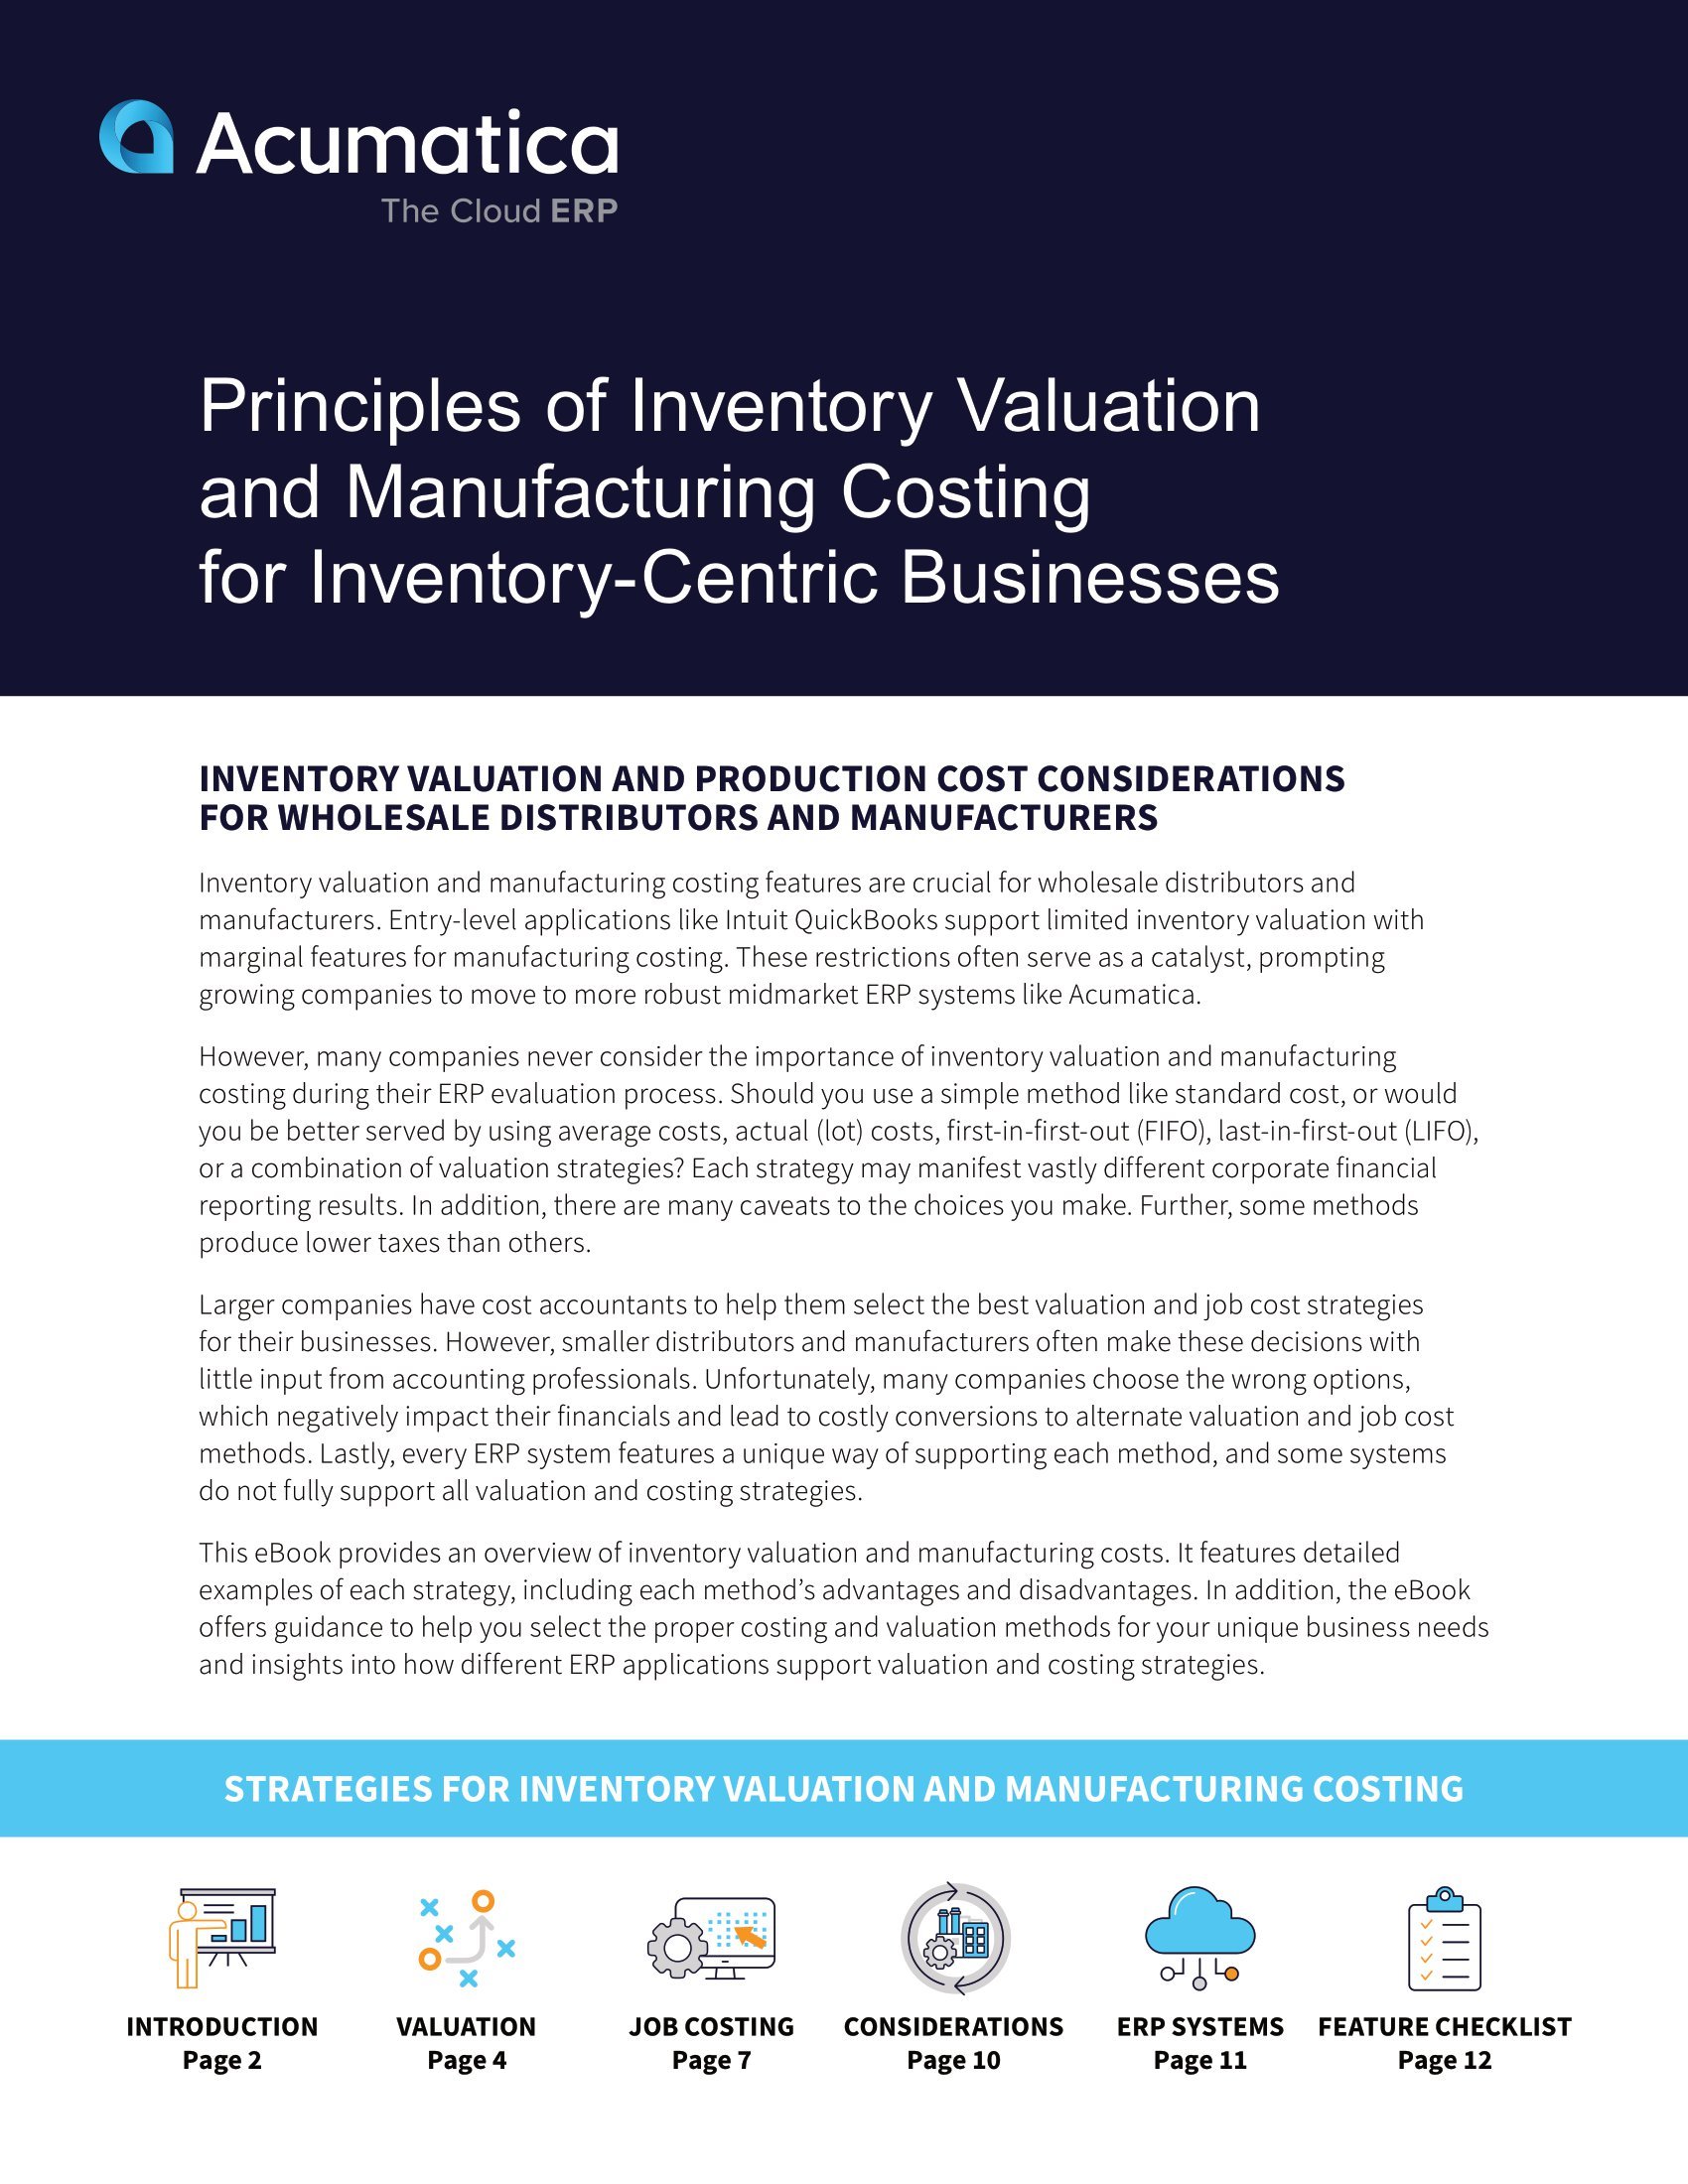 Gain Insights Into Inventory Valuation and Manufacturing Costing Strategies